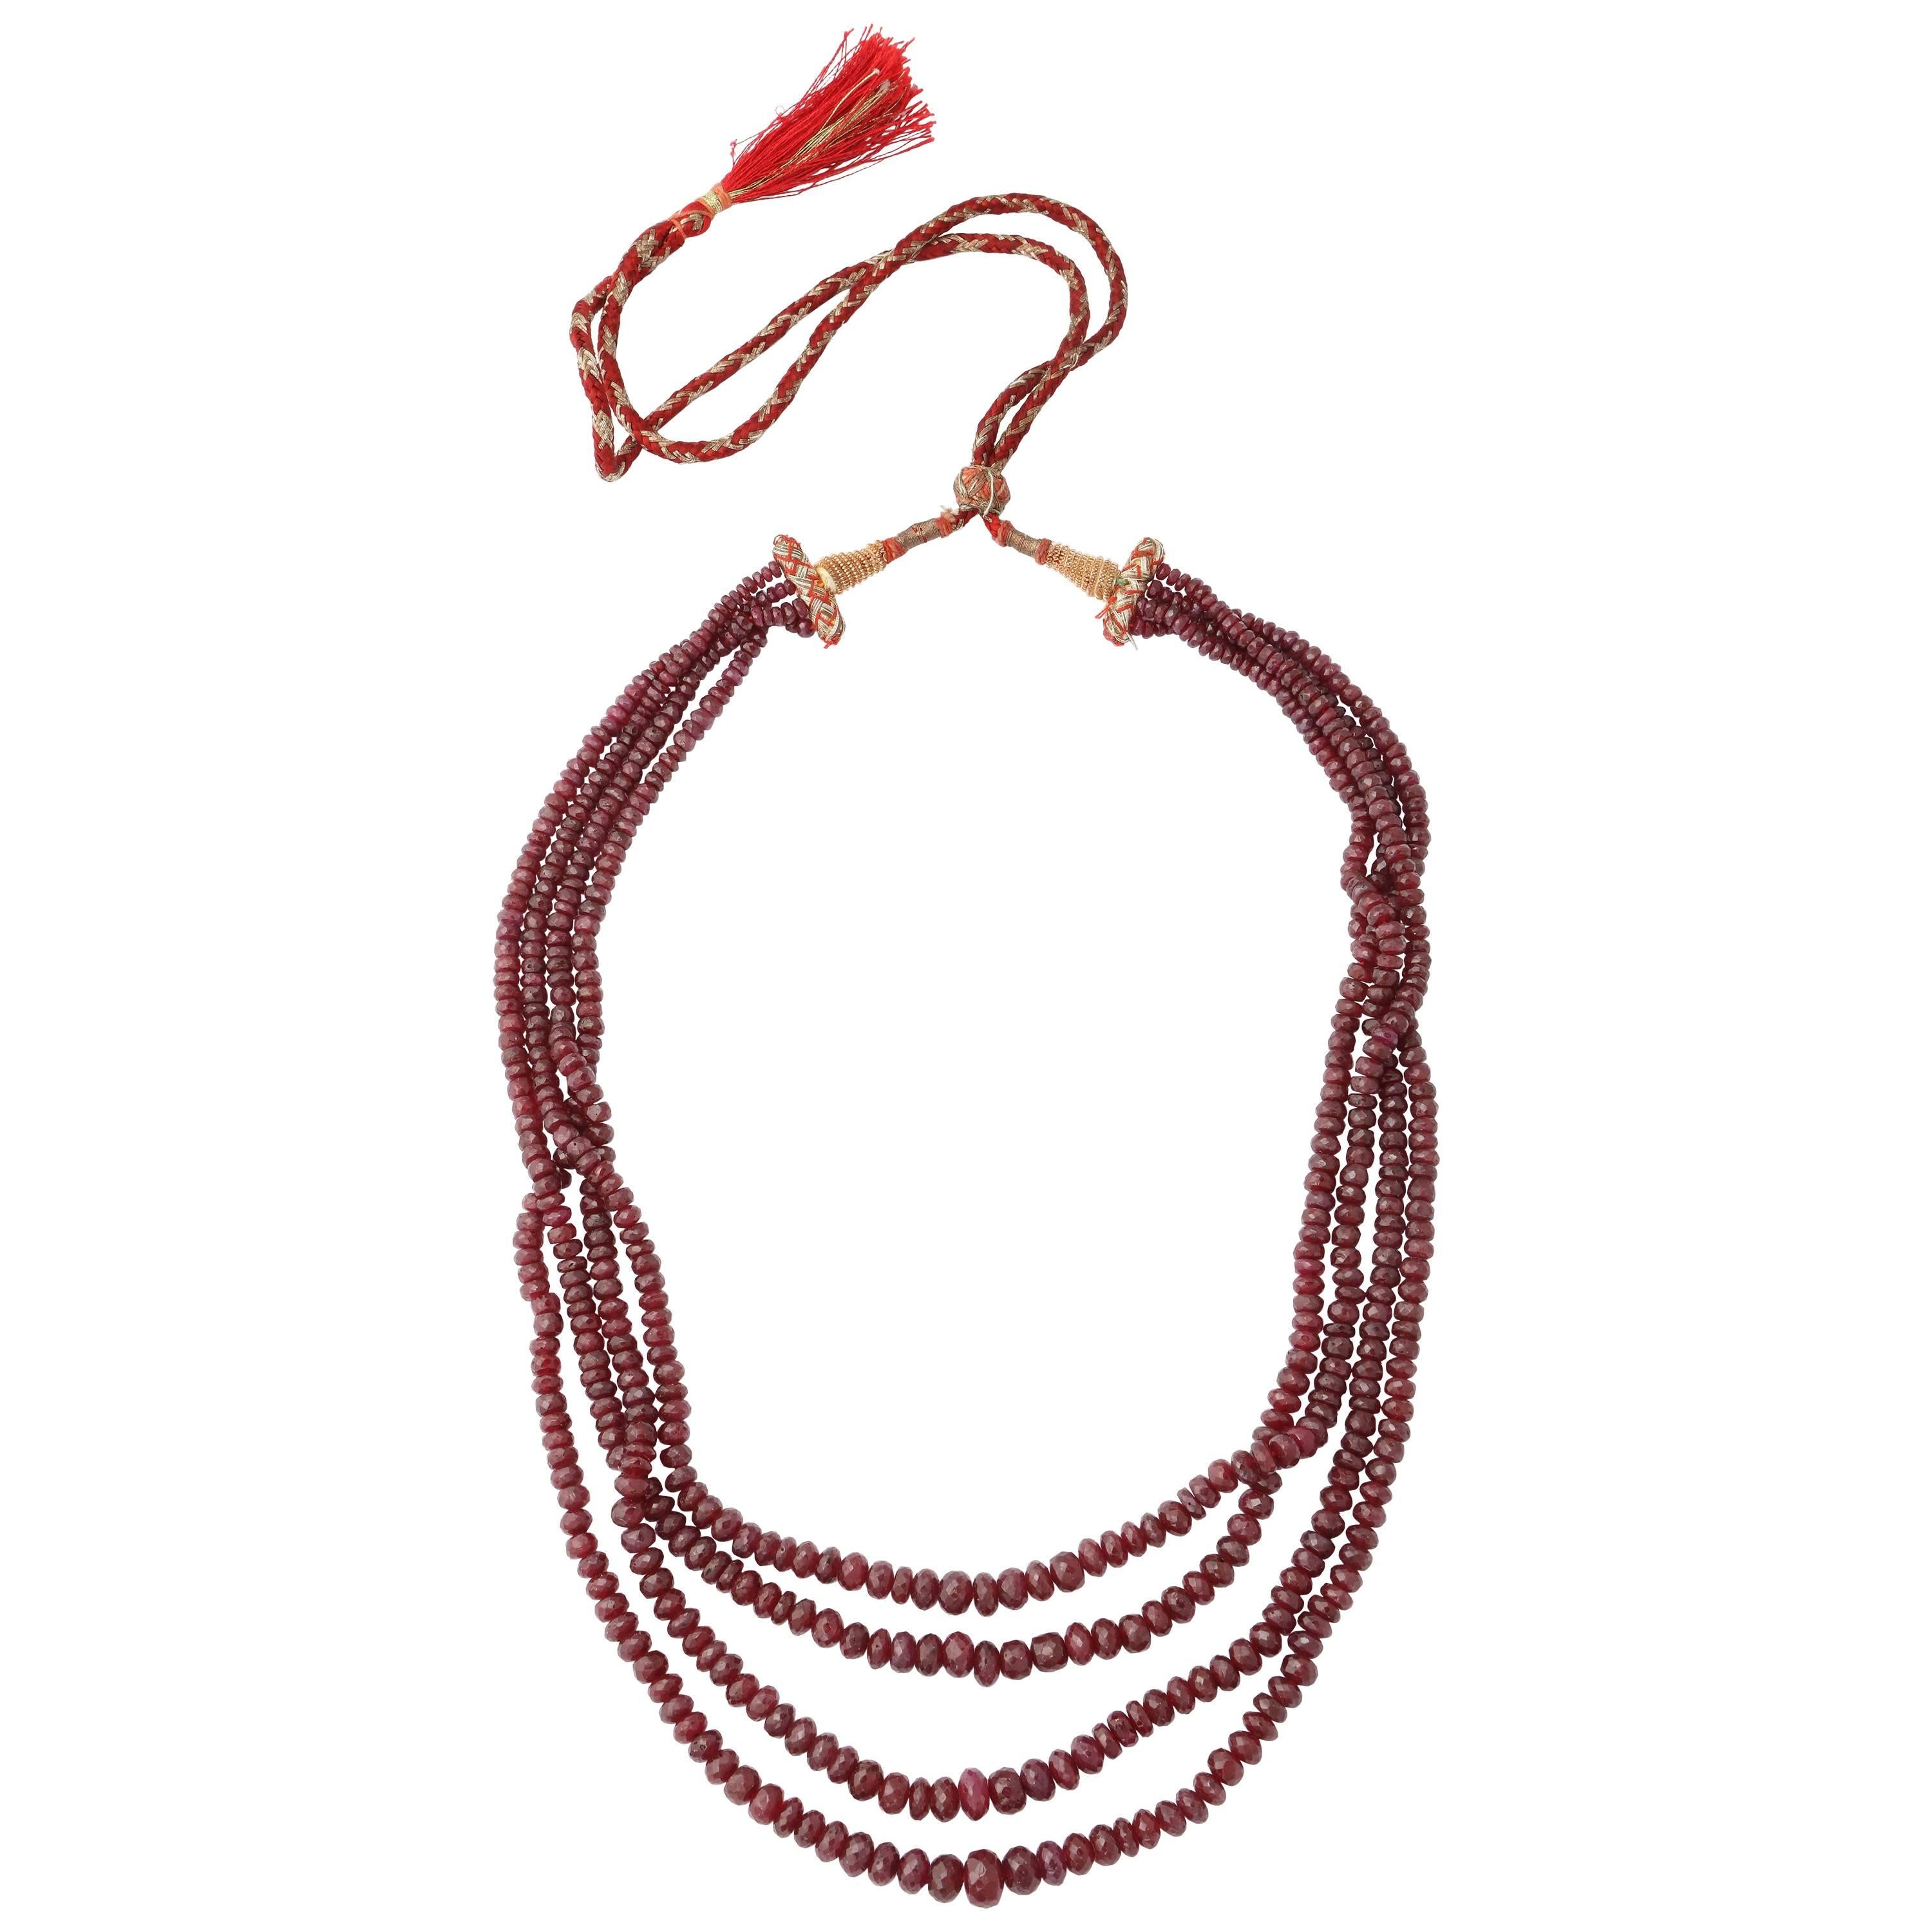 4 Strand Faceted Ruby Bead Necklace with Original Stringing For Sale